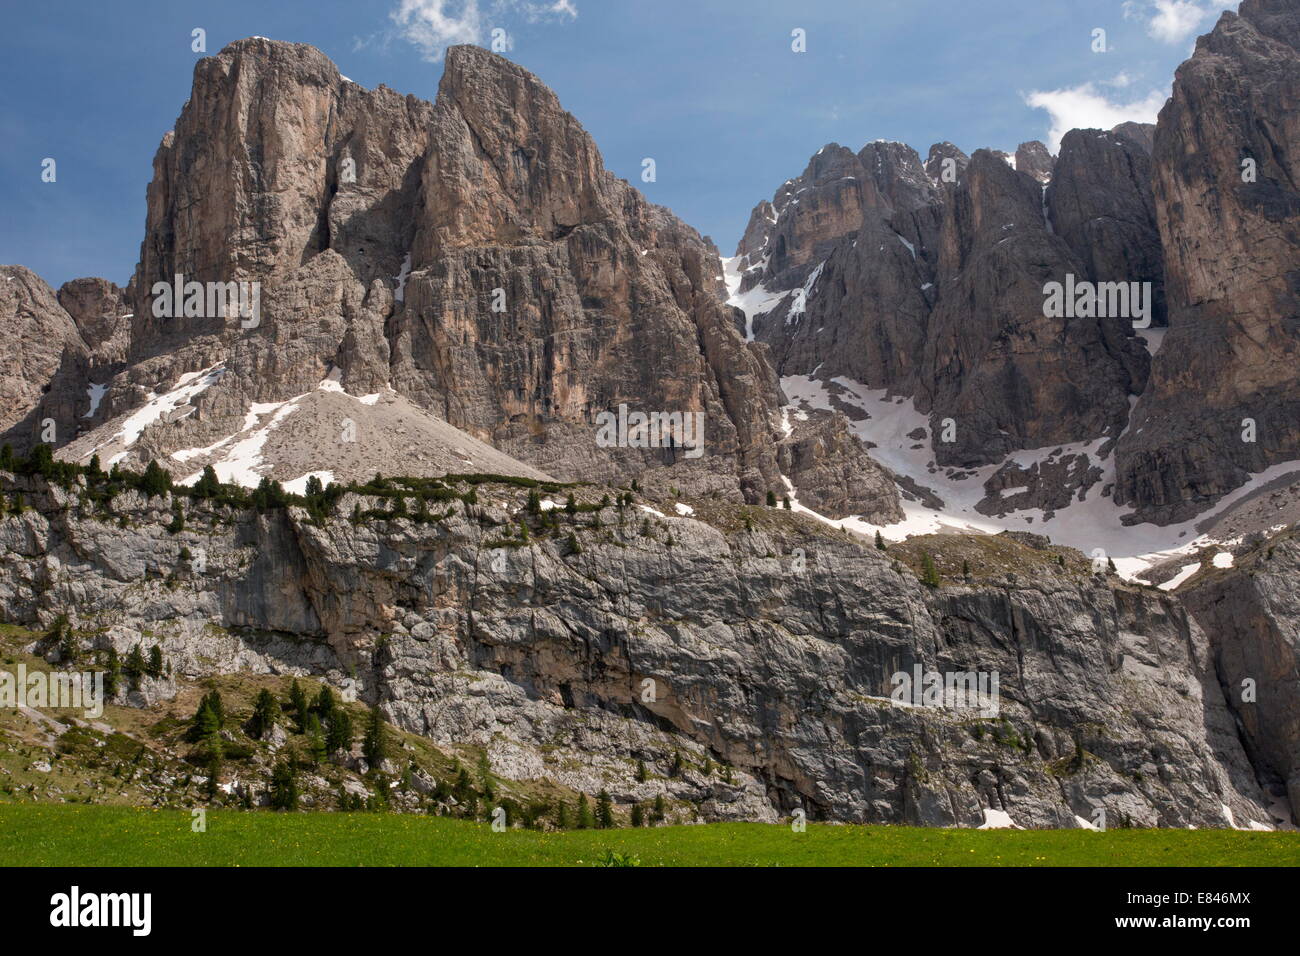 North cliffs of the Sella group - Gruppo di Sella, in early summer; Dolomites, Italy Stock Photo